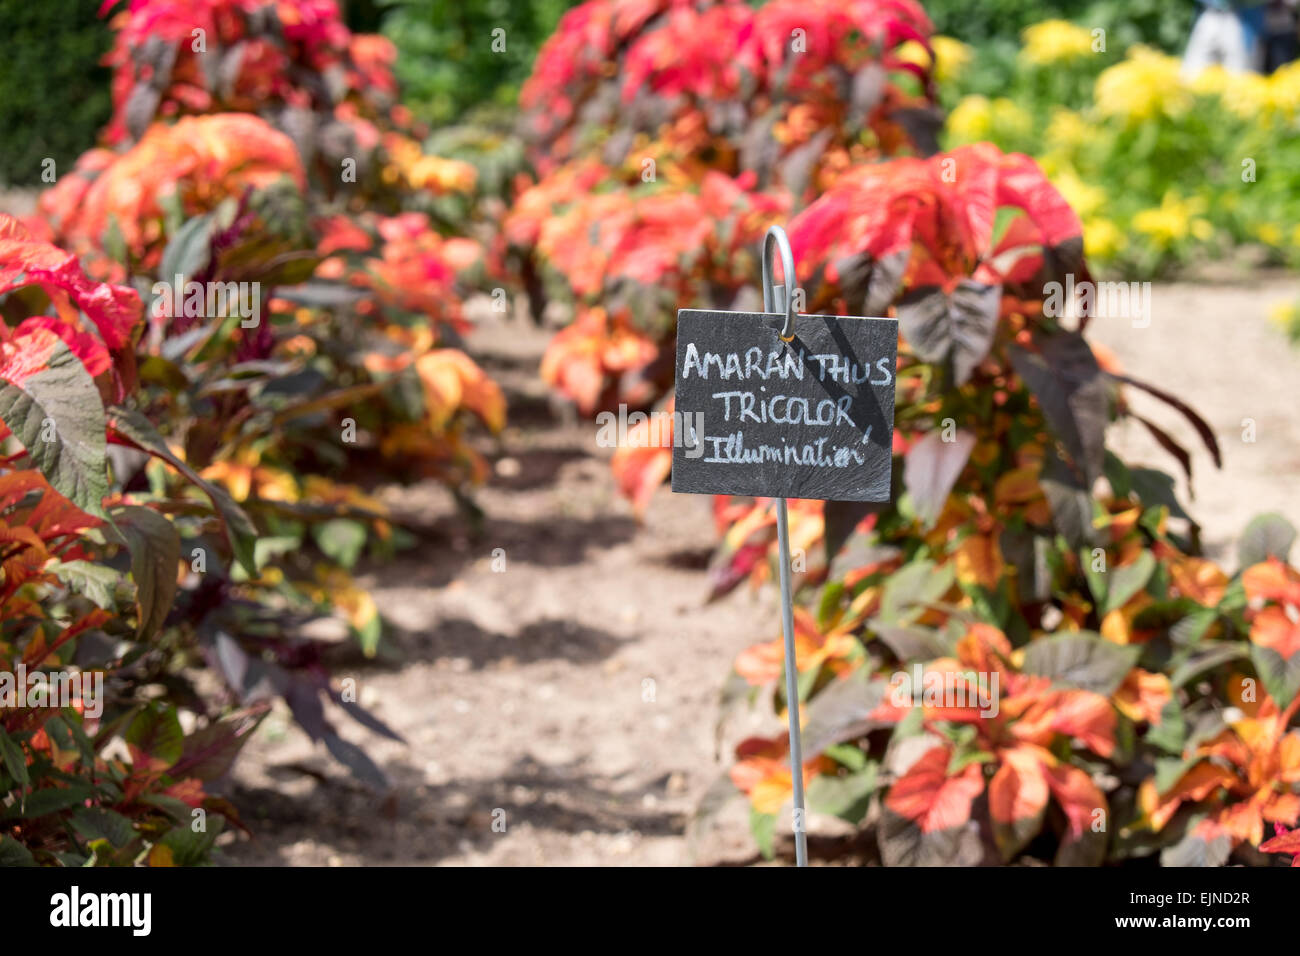 Amaranthus 'tricolor' growing in vegetable and flower garden at Chateau de Chenonceau in the Indre-et-Loire, France Stock Photo